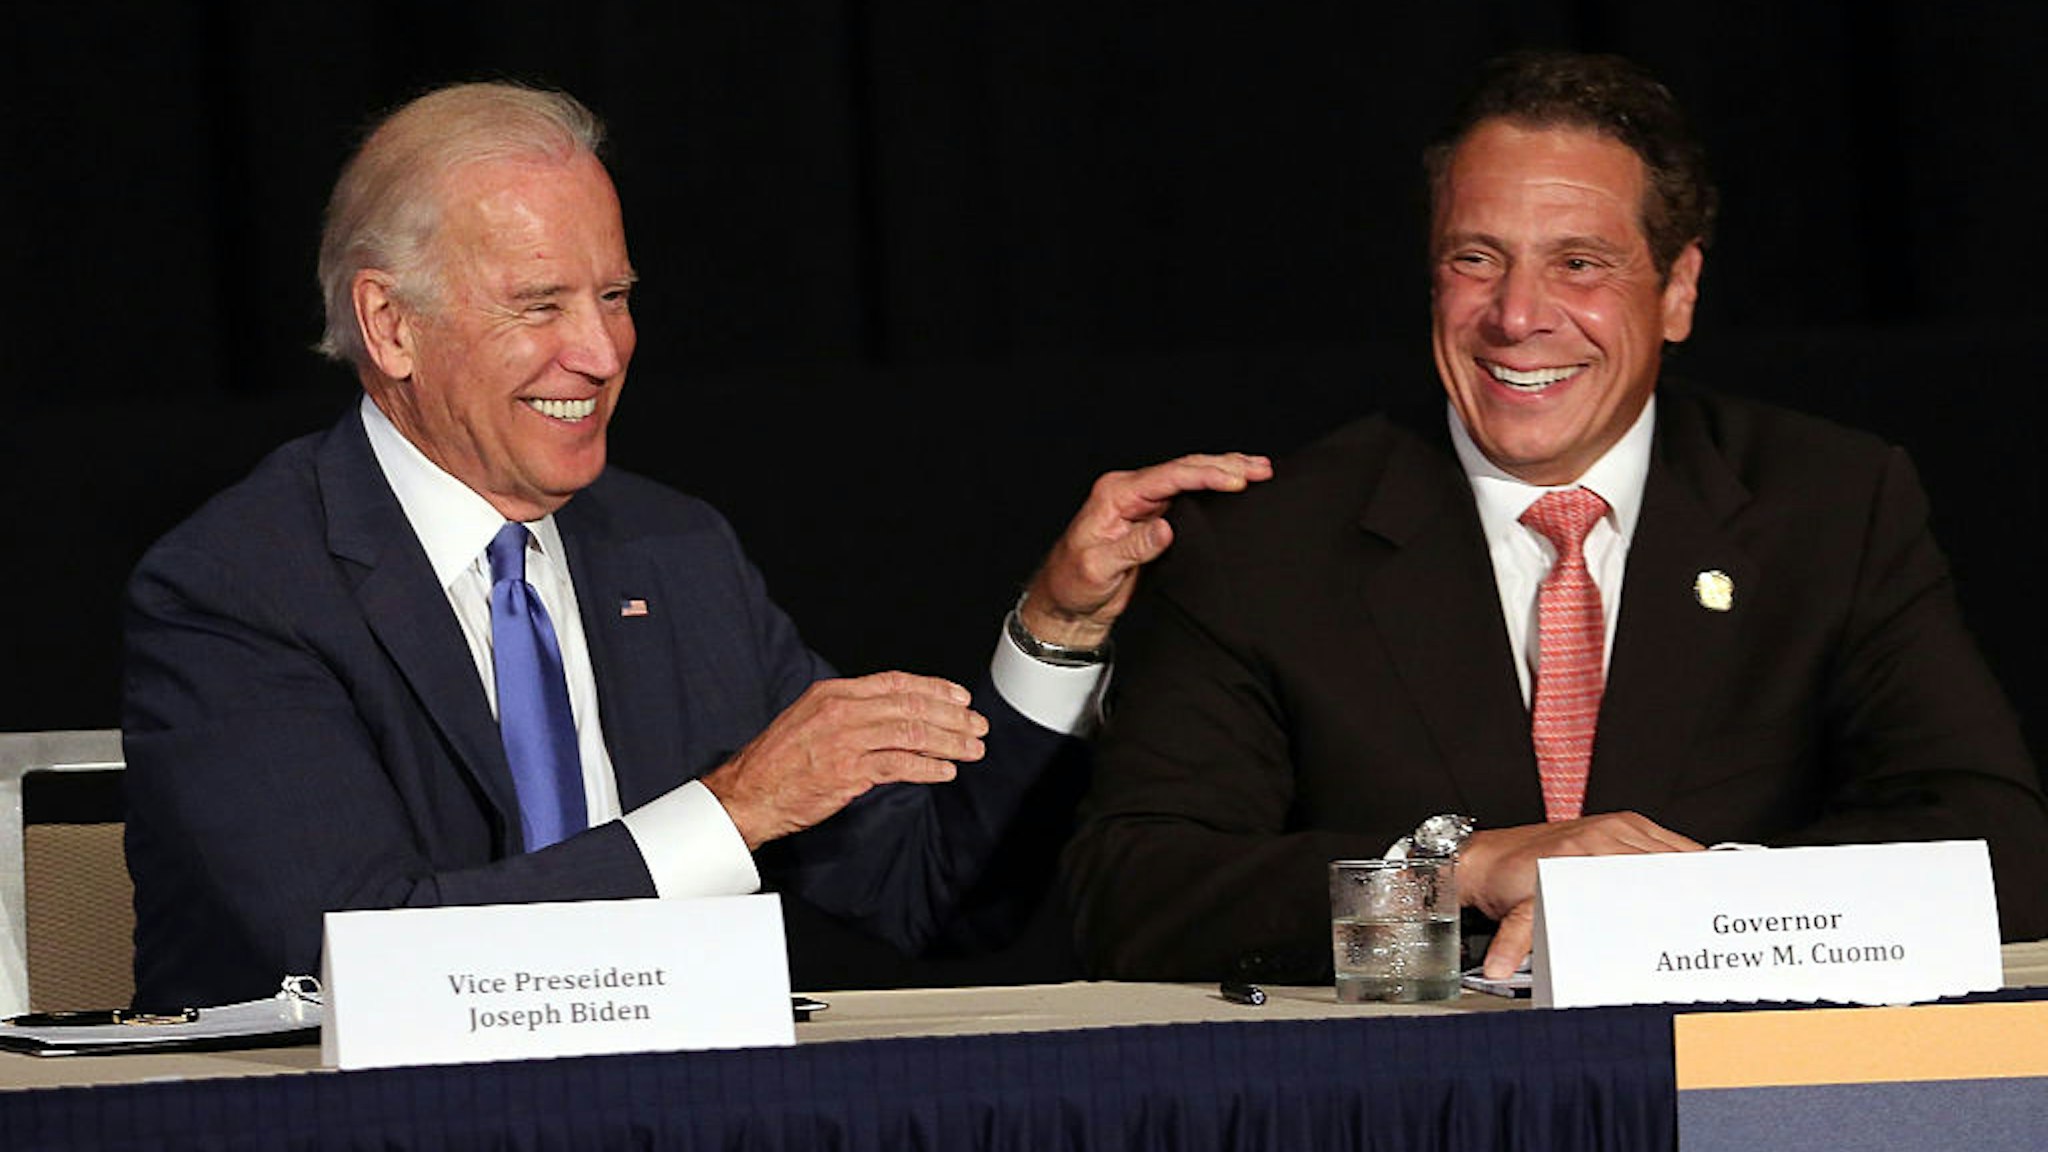 Joe Biden And Andrew Cuomo Make Major Infrastructure Announcement In NYC